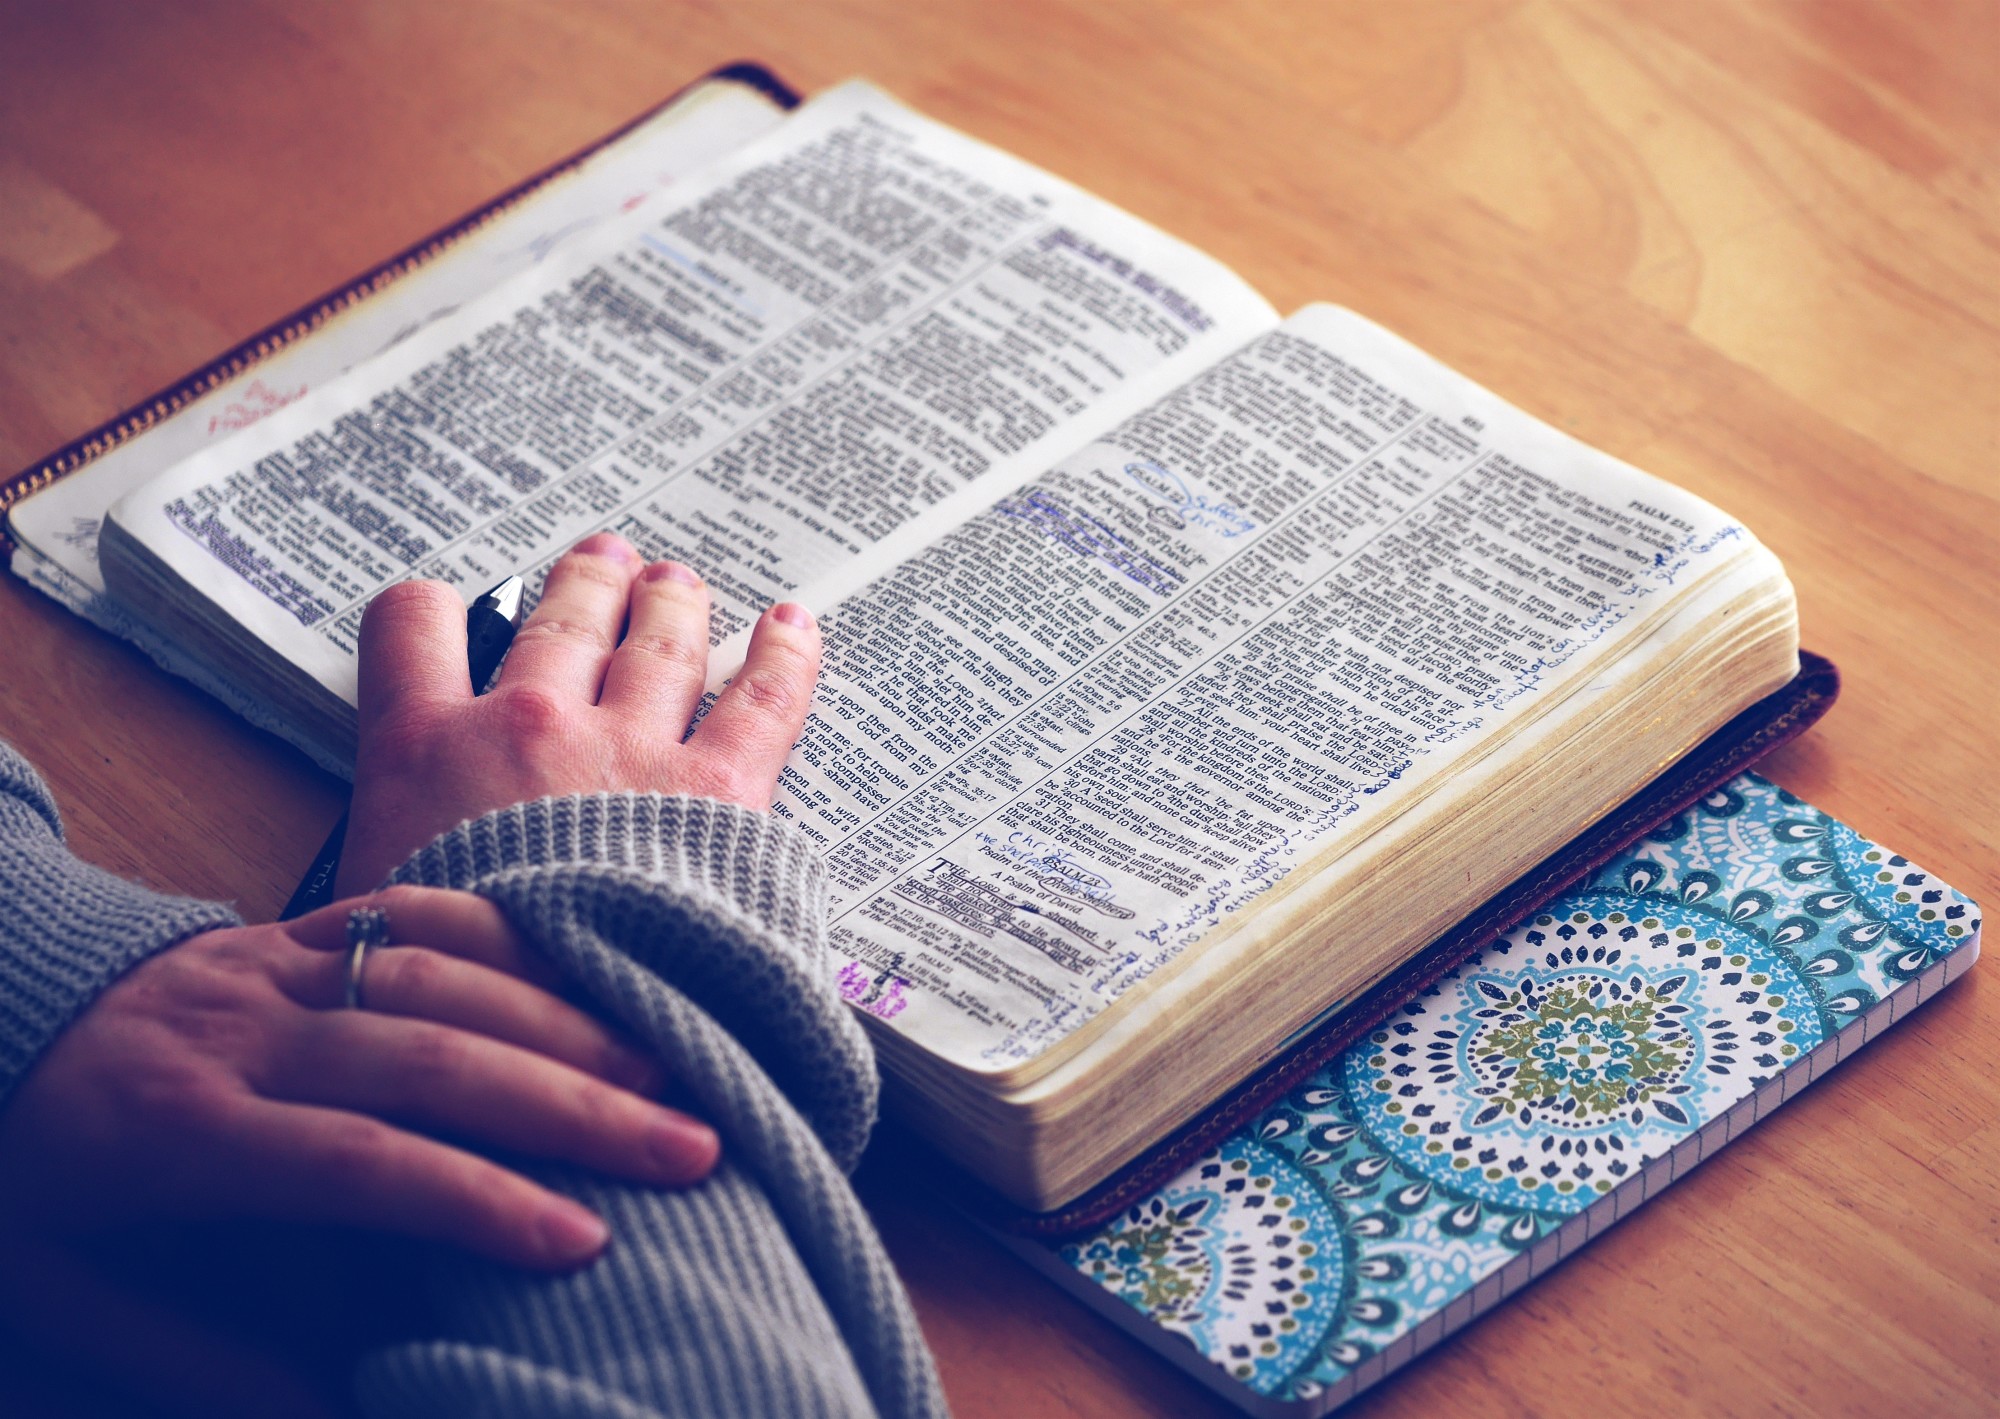 7 Tips for Effectively Reading the Bible